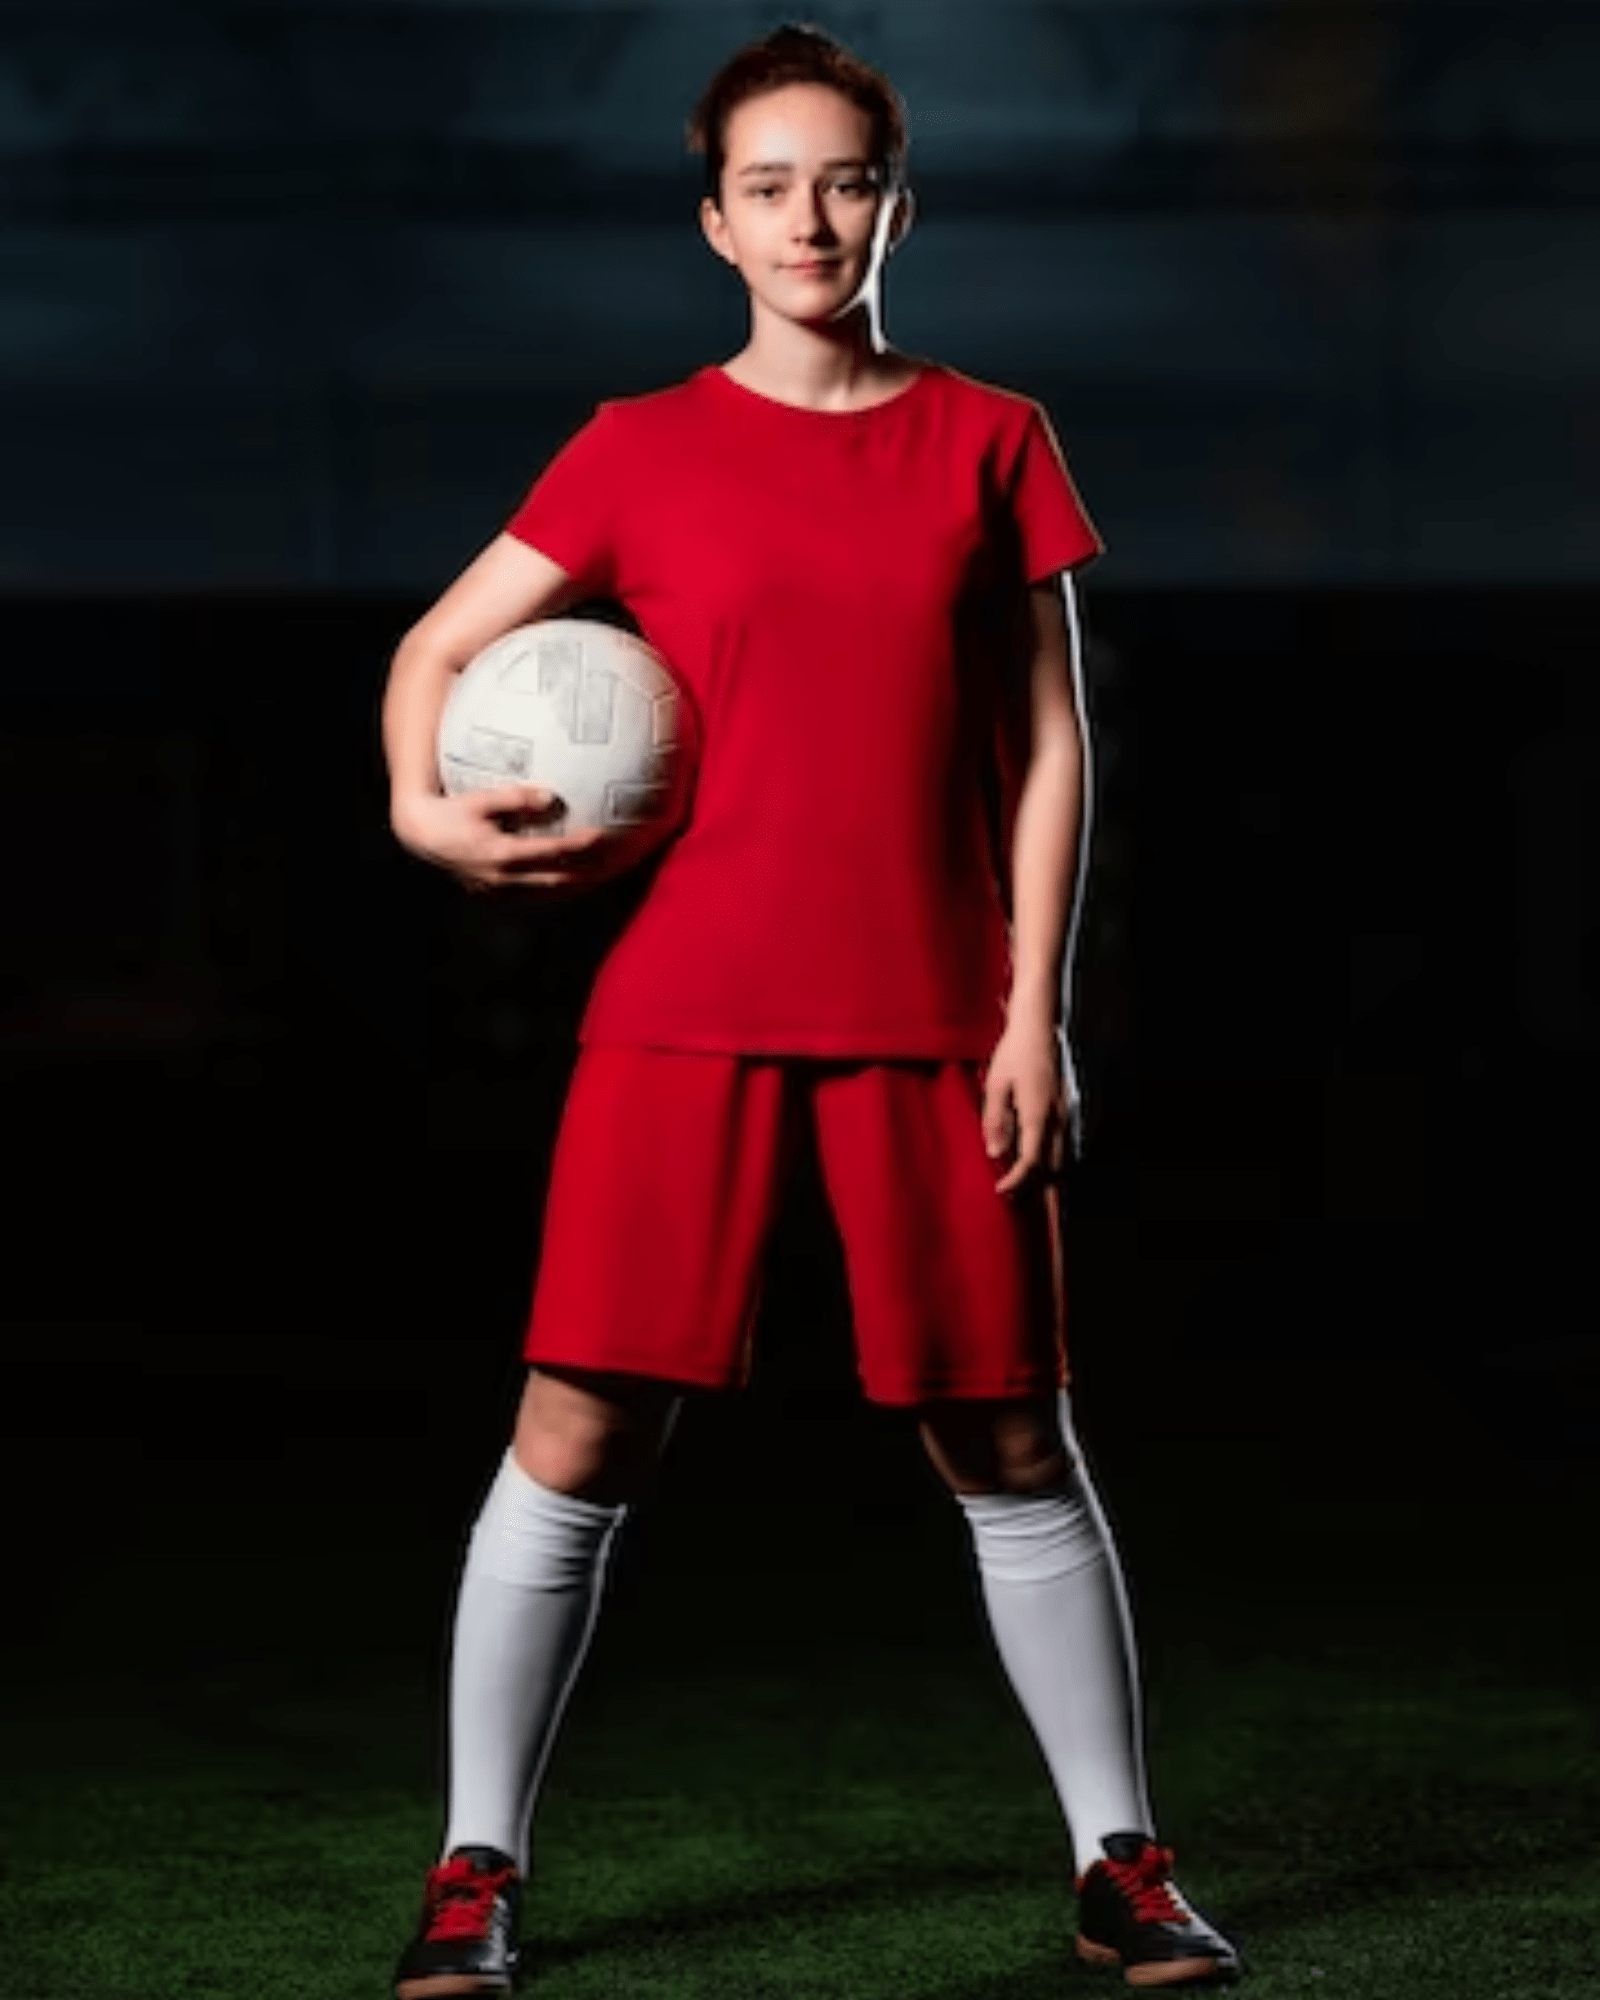 Girl With football pic 1